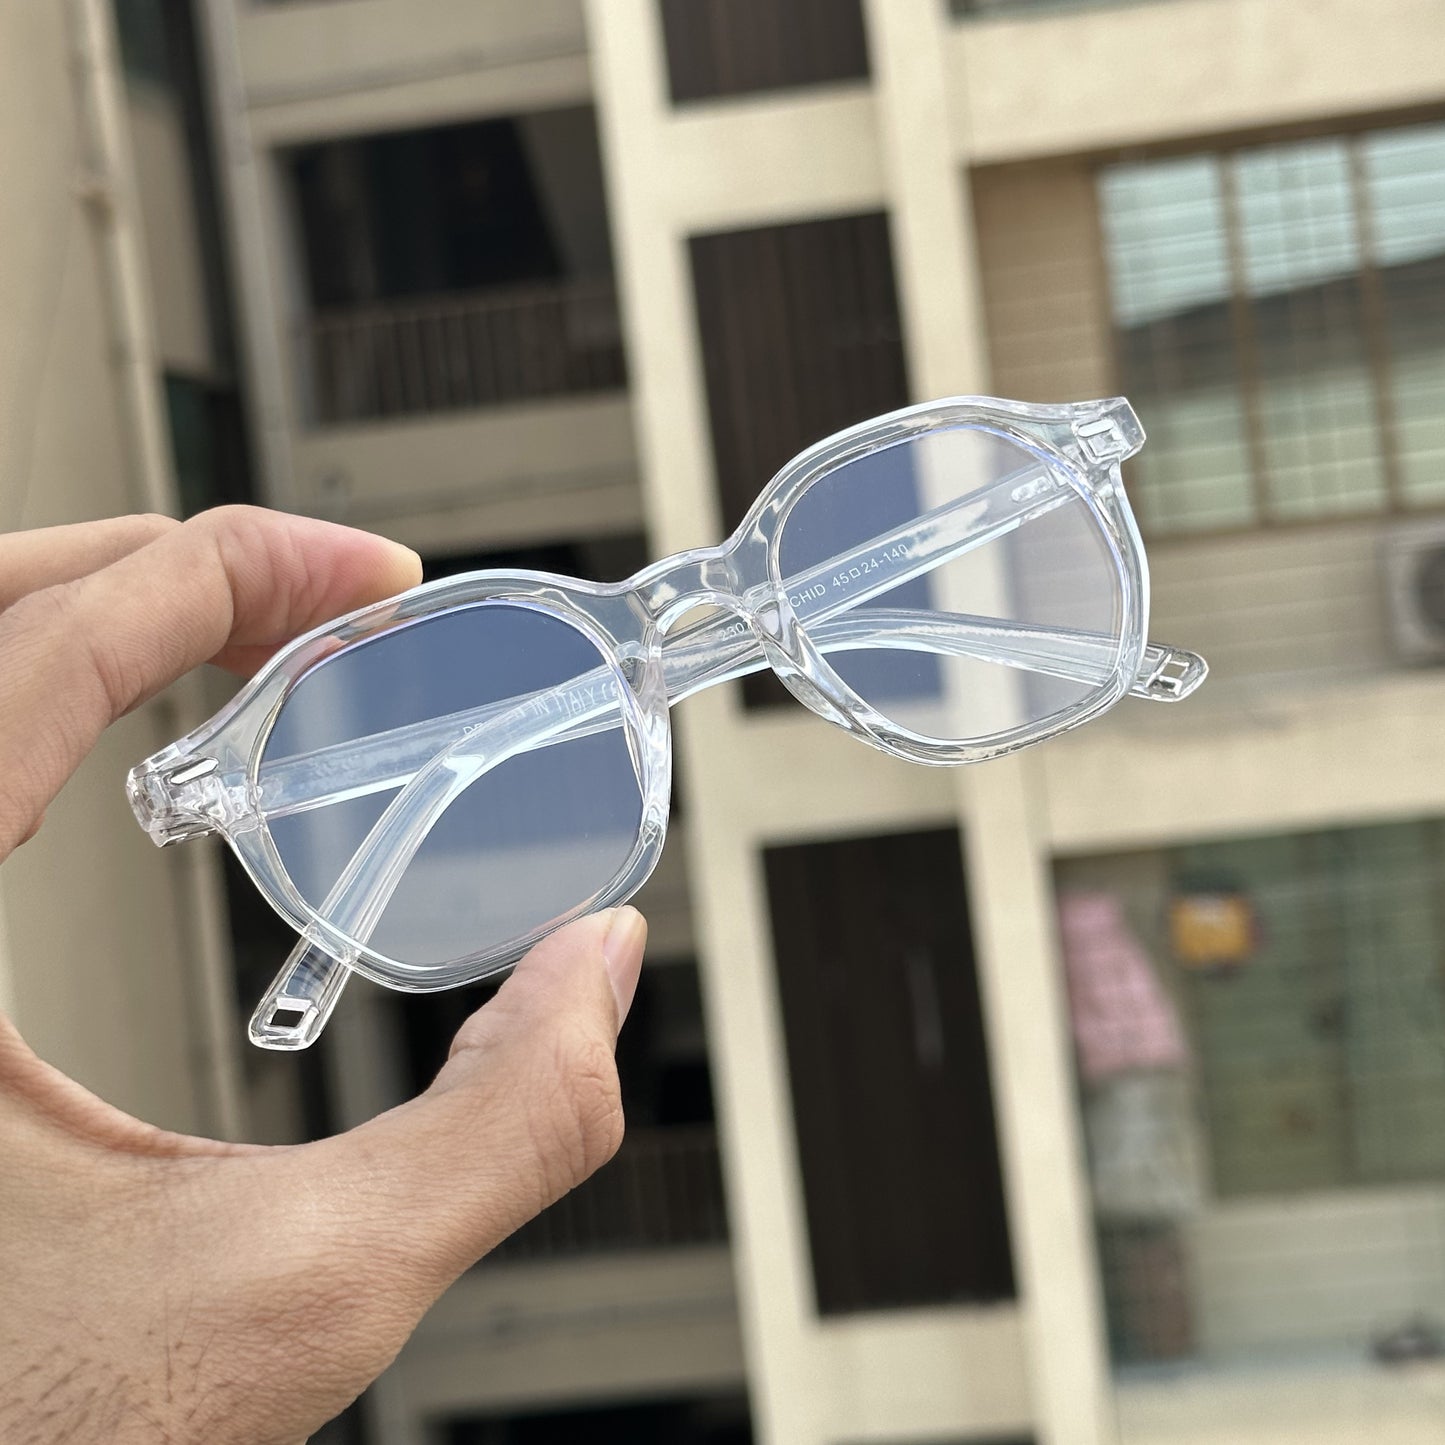 Orchid Clear Round Sunglasses